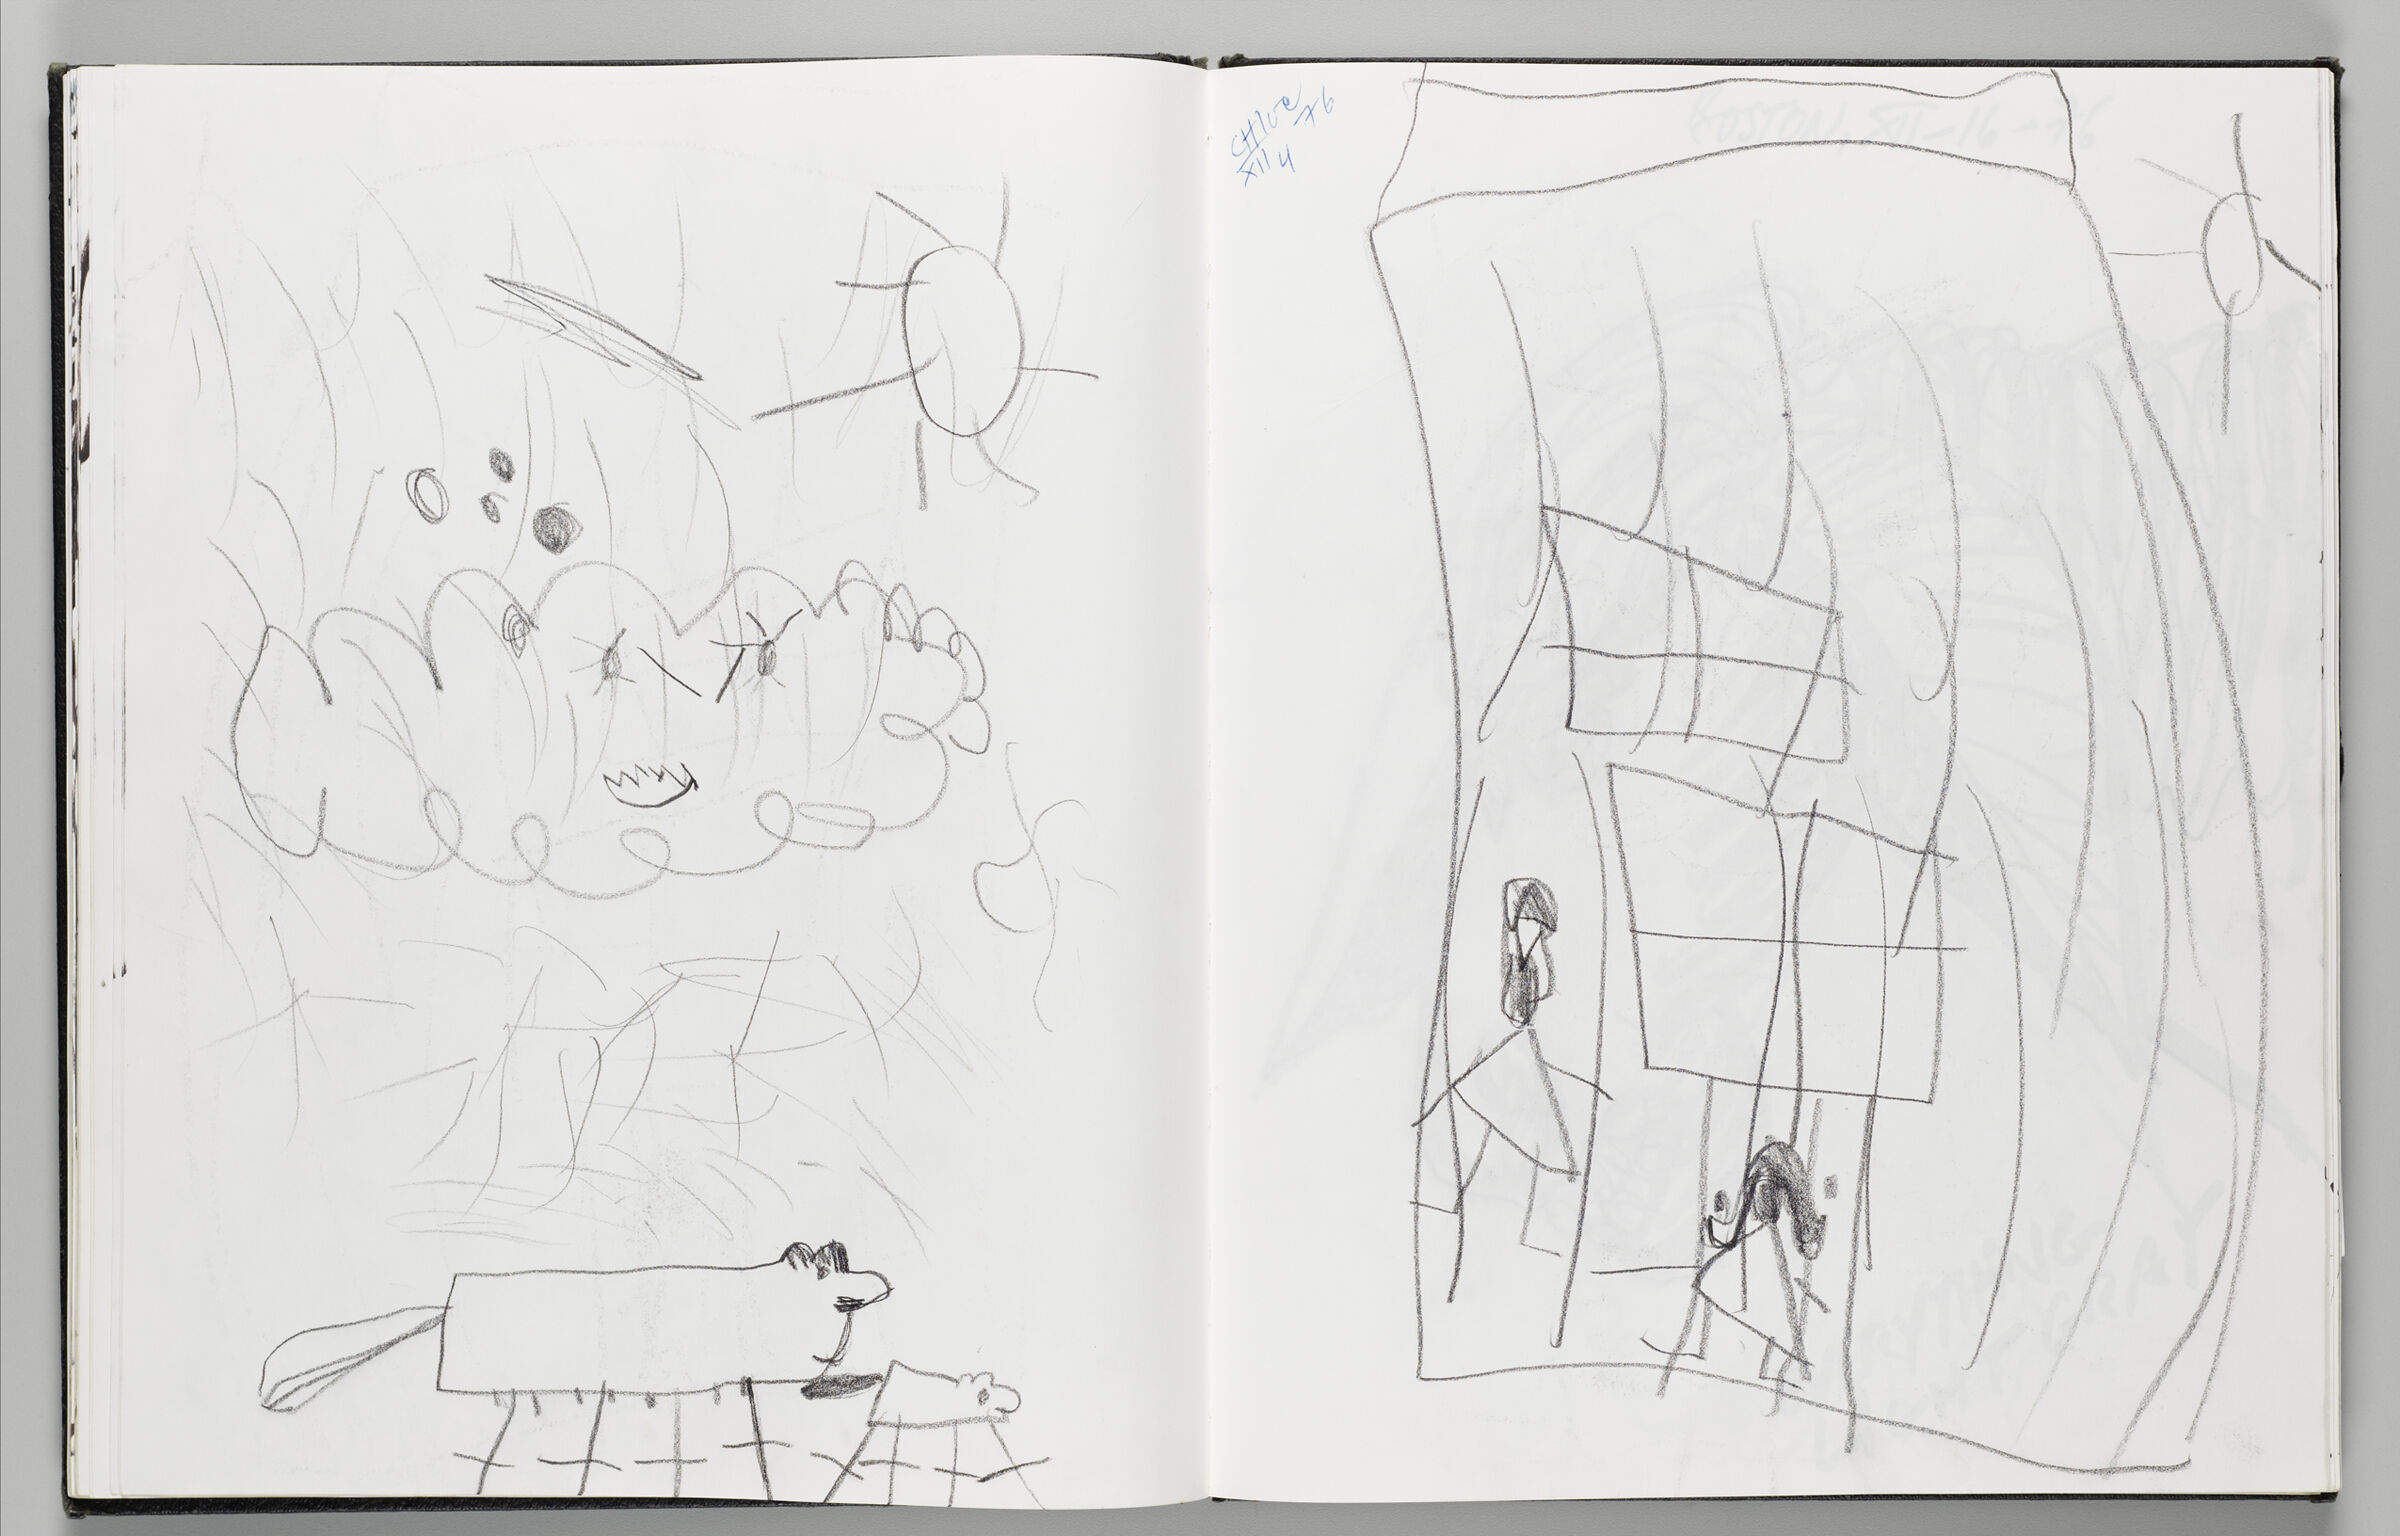 Untitled (Sketch By Piene's Daughter [Chloe], Left Page); Untitled (Sketch By Piene's Daughter [Chloe] Right Page)